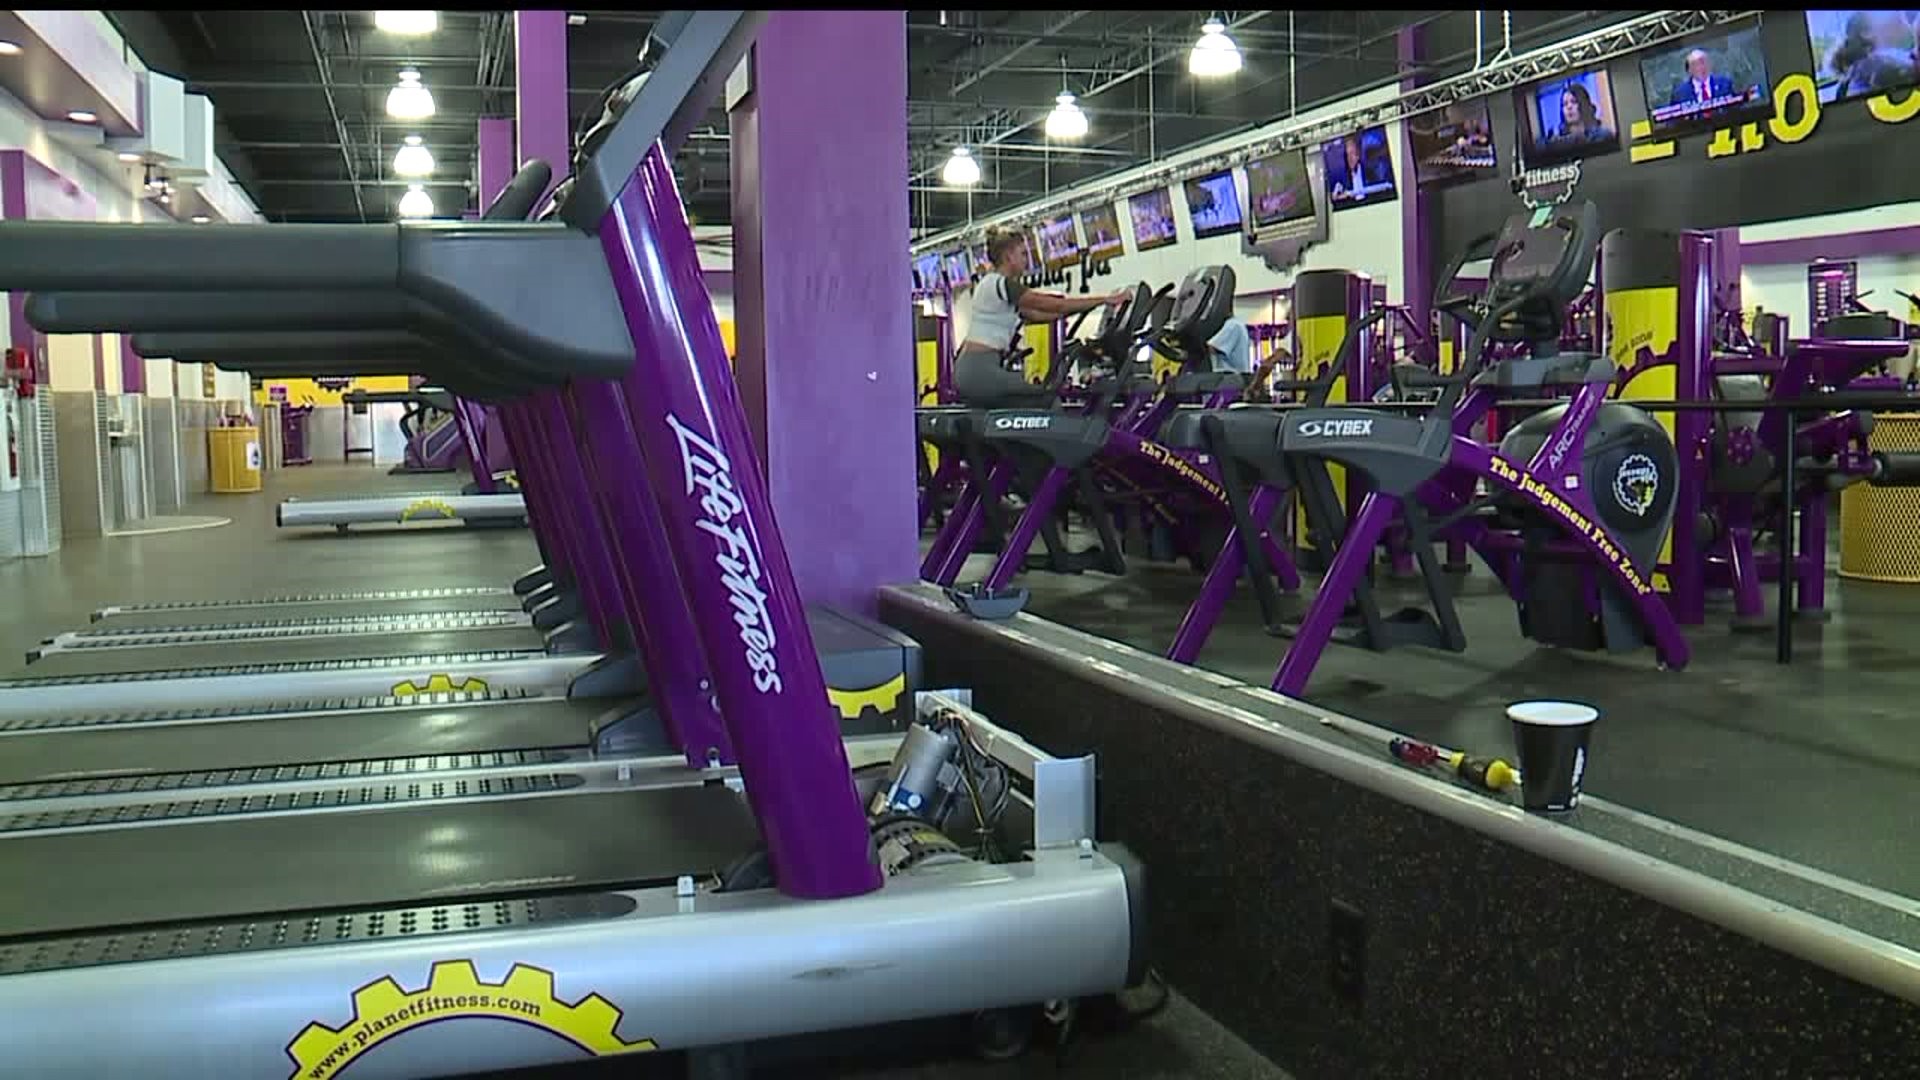 15 Minute Planet Fitness Near Me Now for Weight Loss